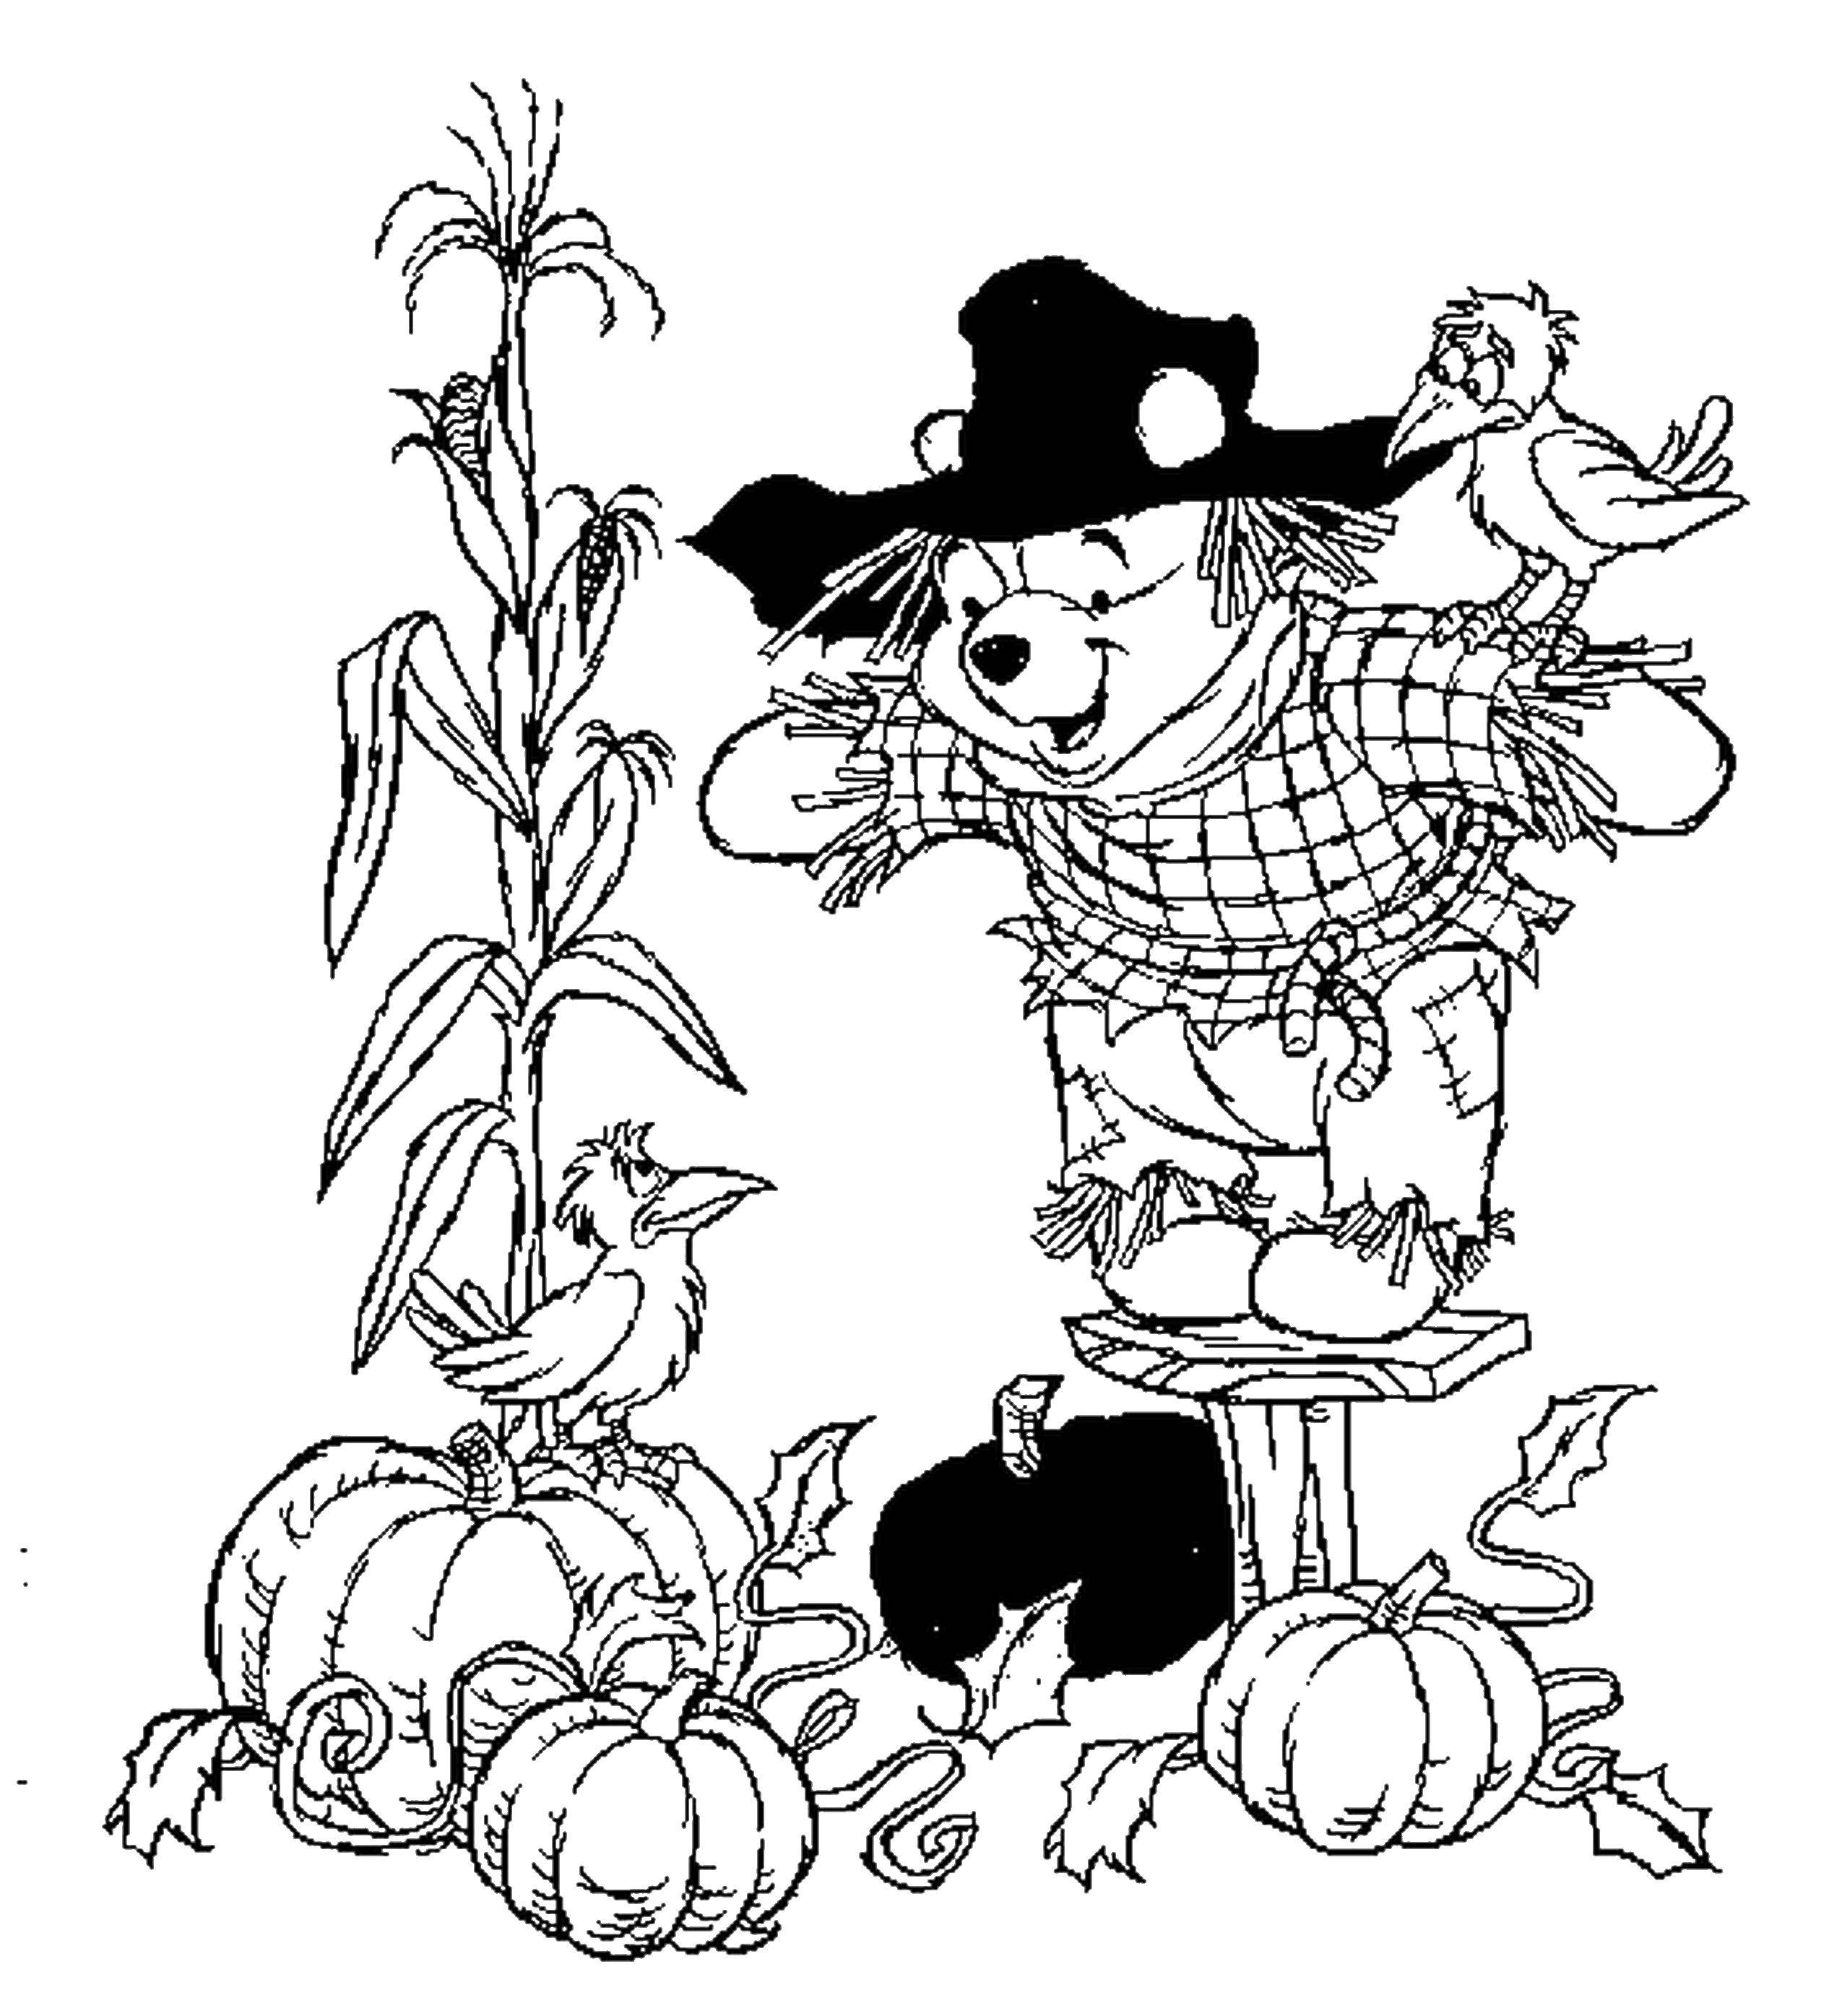 Coloring Winnie the Pooh Scarecrow. Category Disney cartoons. Tags:  Winnie the Pooh, Piglet.